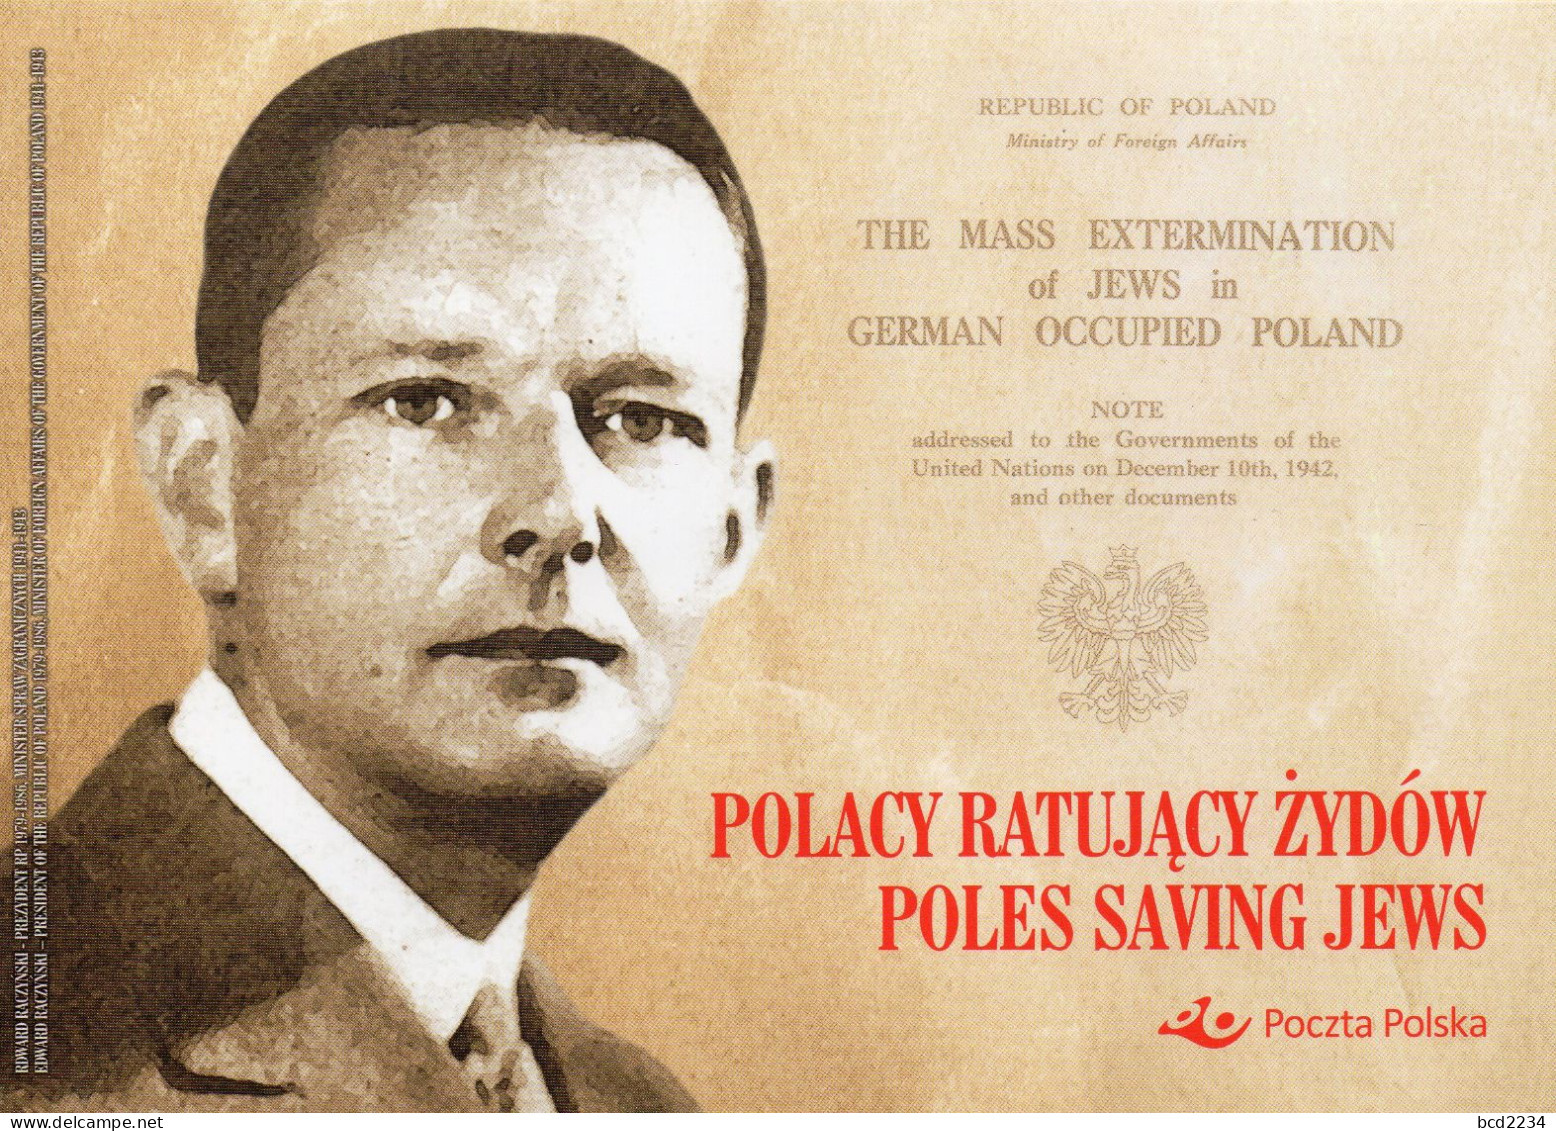 POLAND 2020 POLISH POST OFFICE SPECIAL LIMITED EDITION FOLDER: POLES SAVING JEWS FROM NAZI GERMANY WW2 JUDAICA HISTORY - Covers & Documents